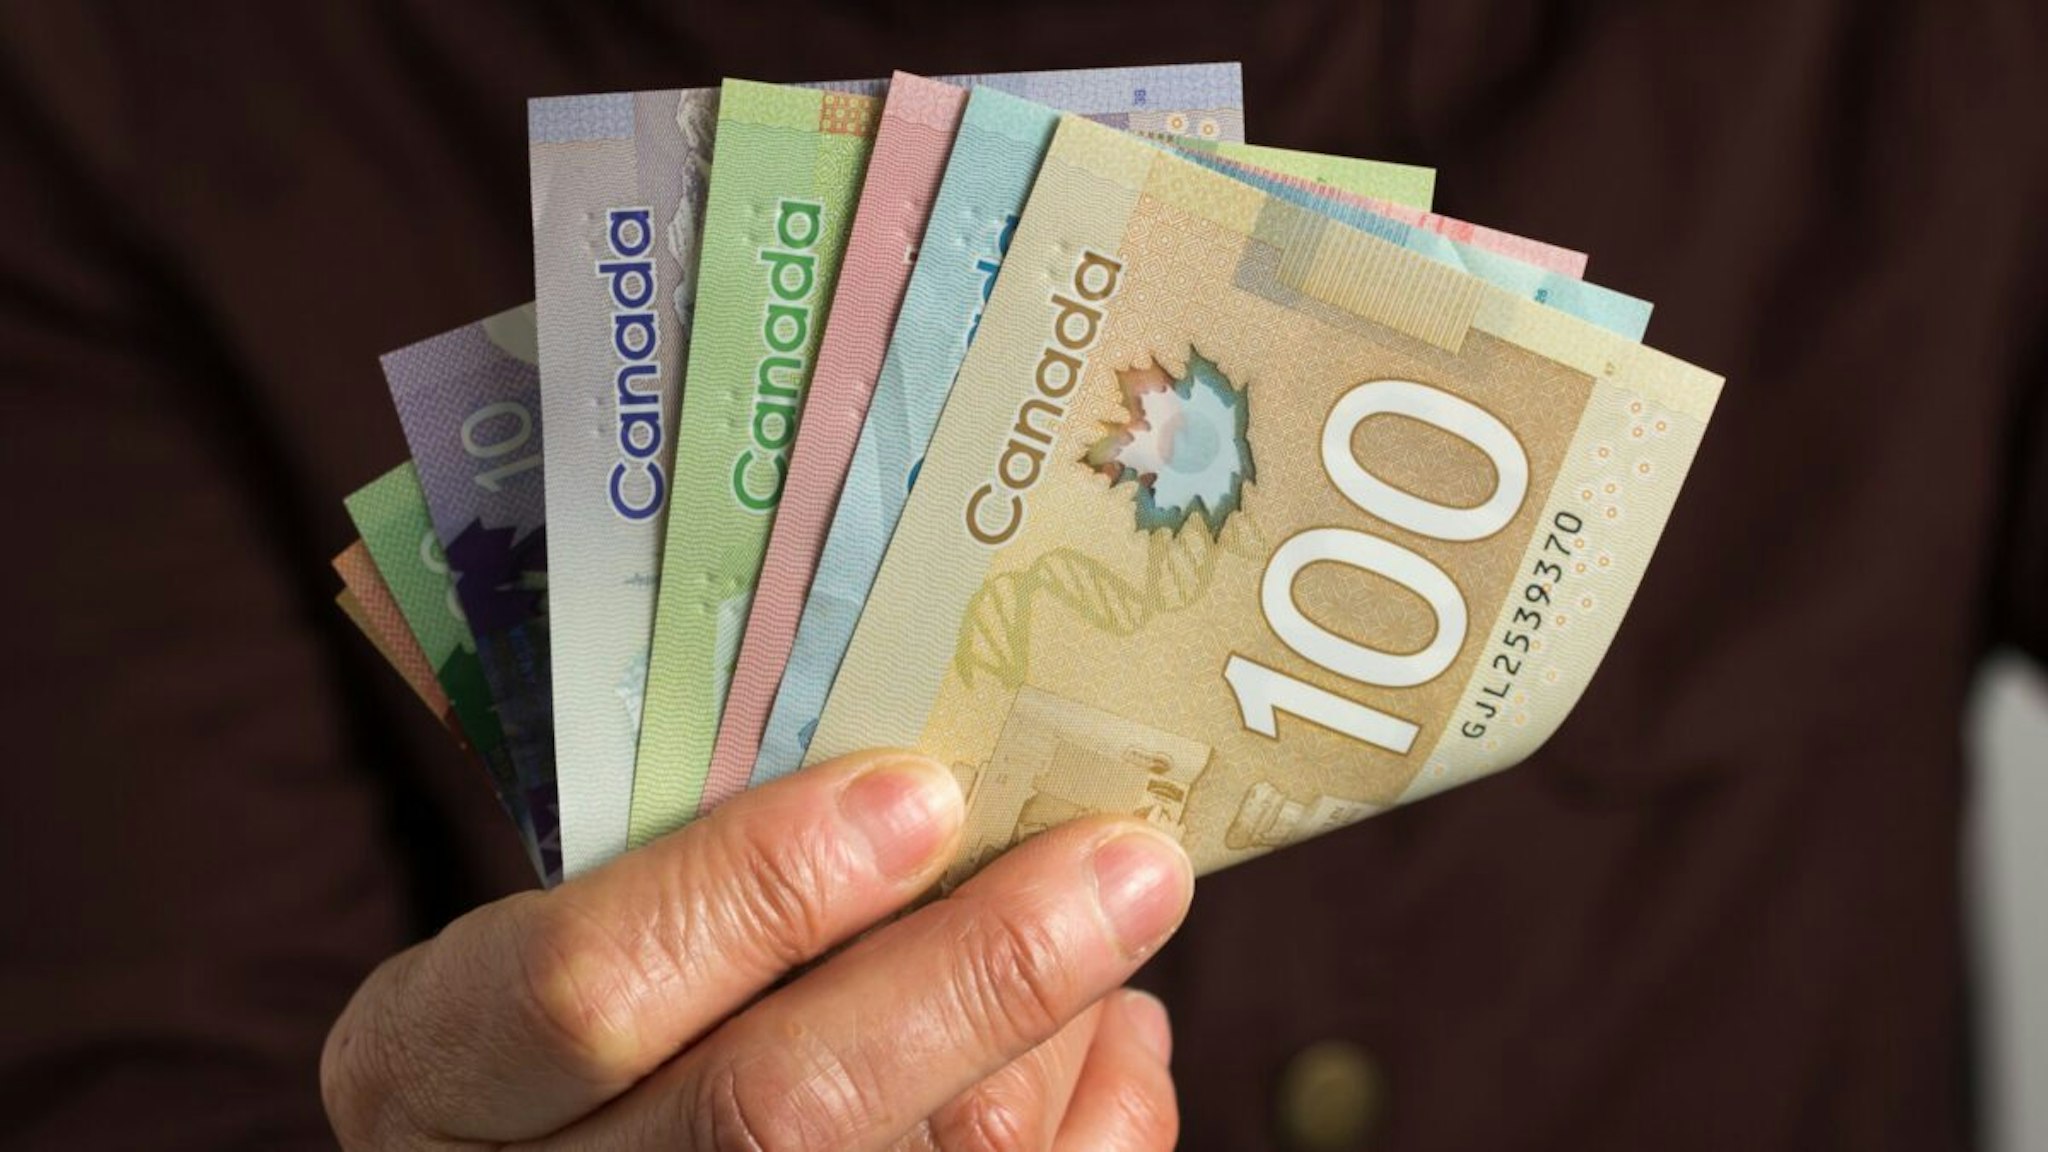 Money from Canada: Canadian Dollars. Old retired person paying in cash.